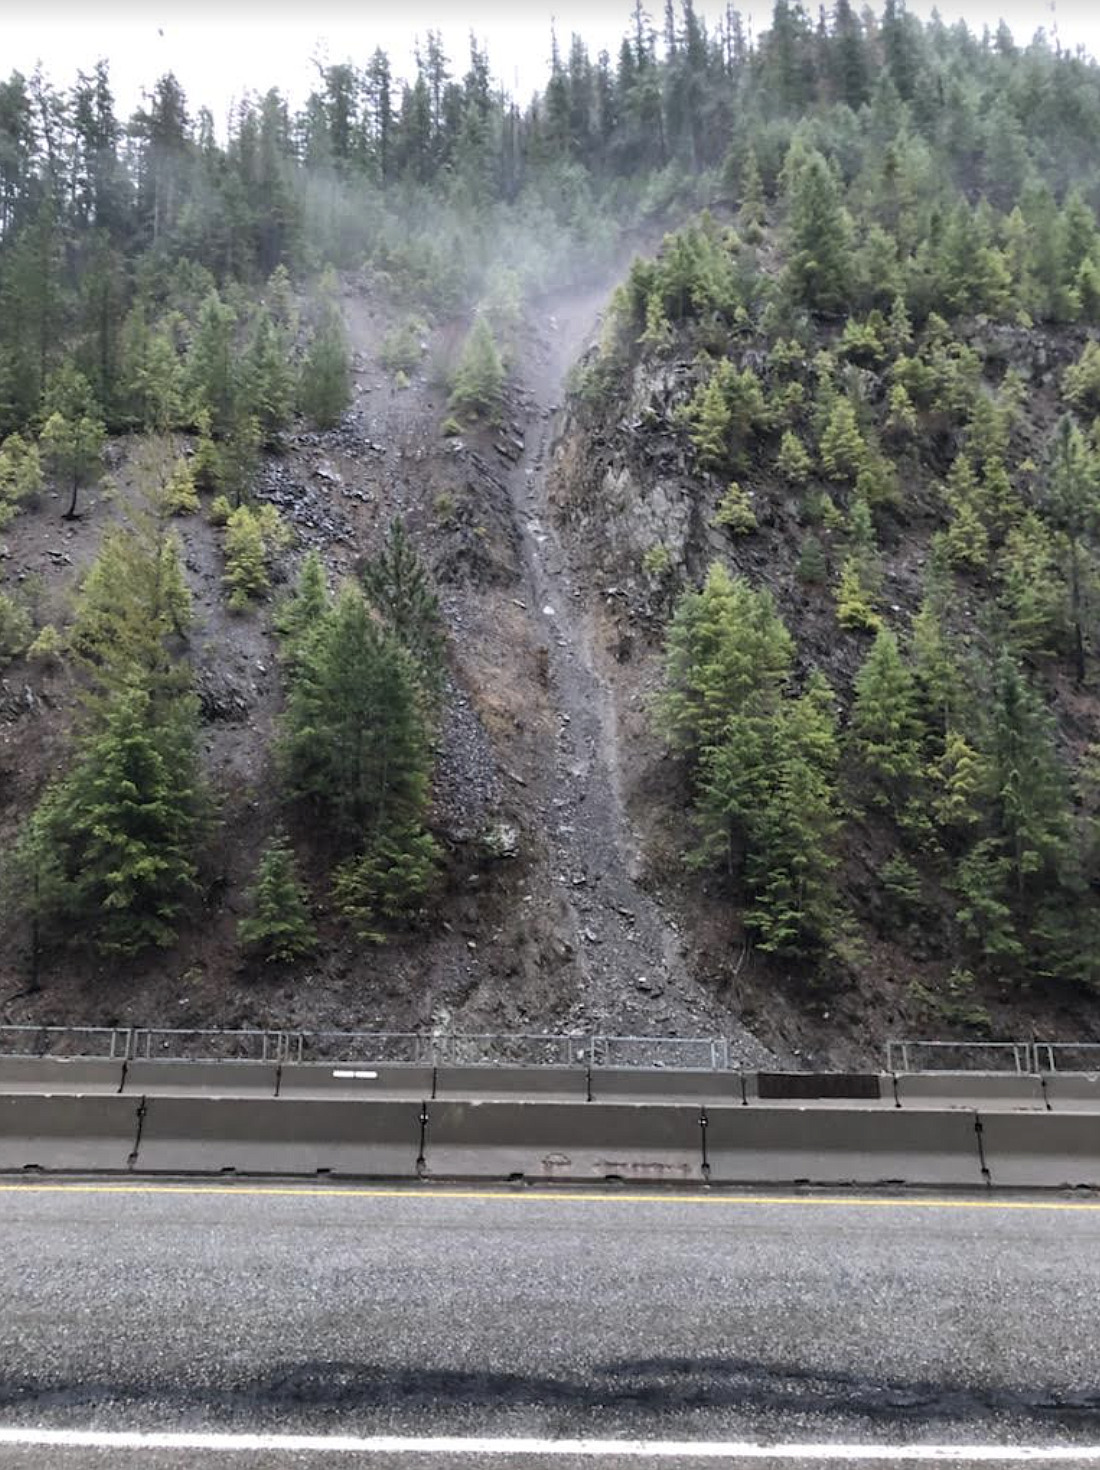 The trouble area on Interstate 90 near milepost 67 that has caused so much trouble. Falling rocks pick up speed when they fall down this hillside trench and can be launched onto the roadway.